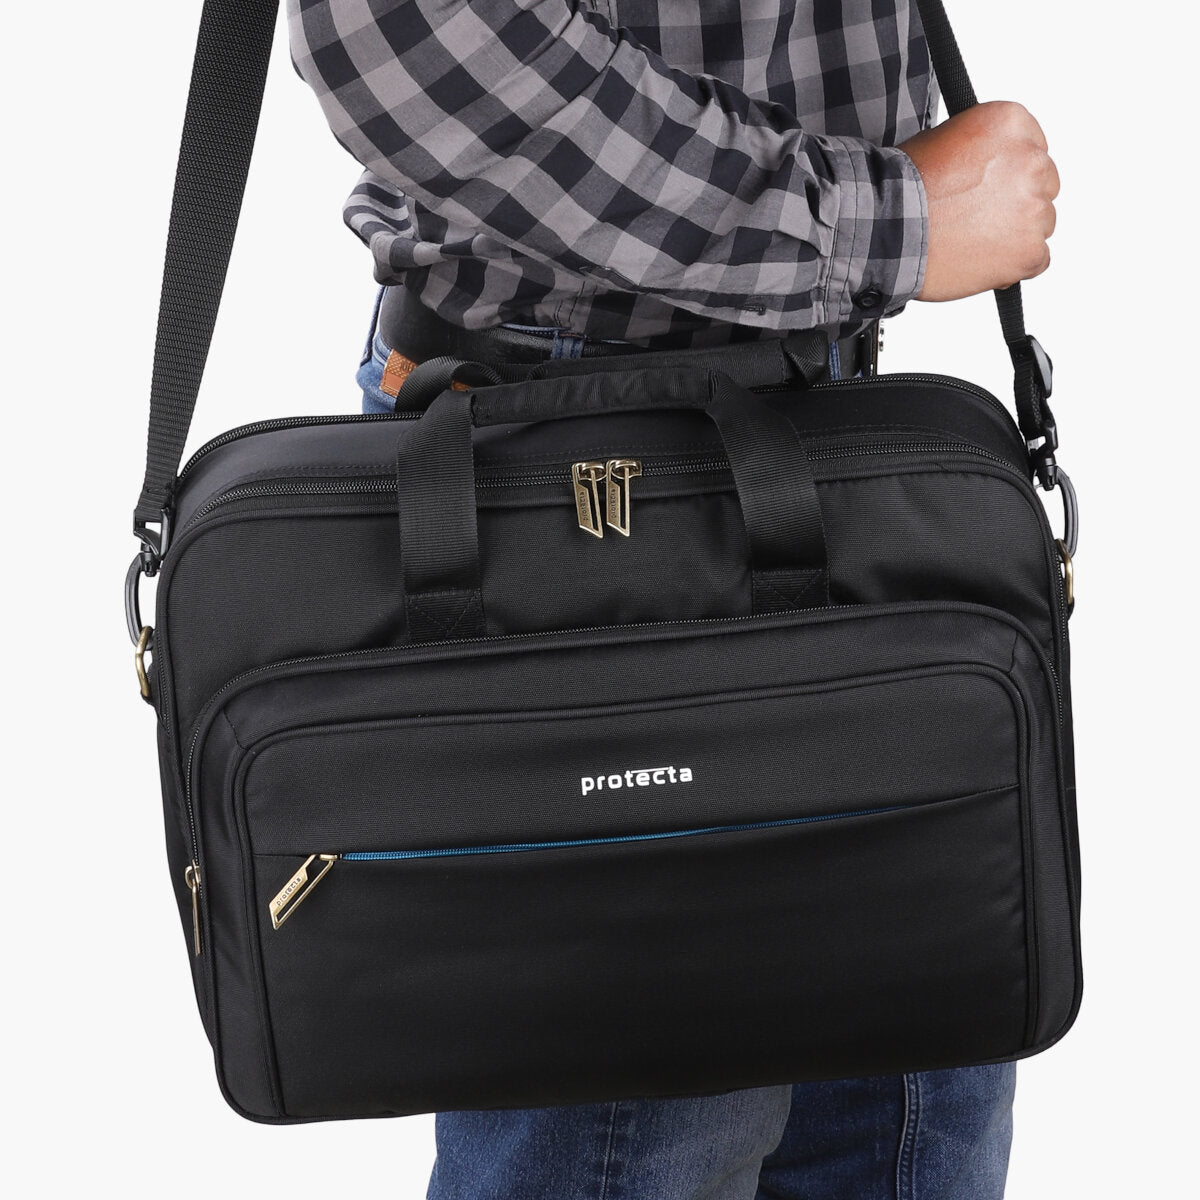 Black-Blue, Protecta Staunch Ally Travel & Offfice Laptop Bag-8